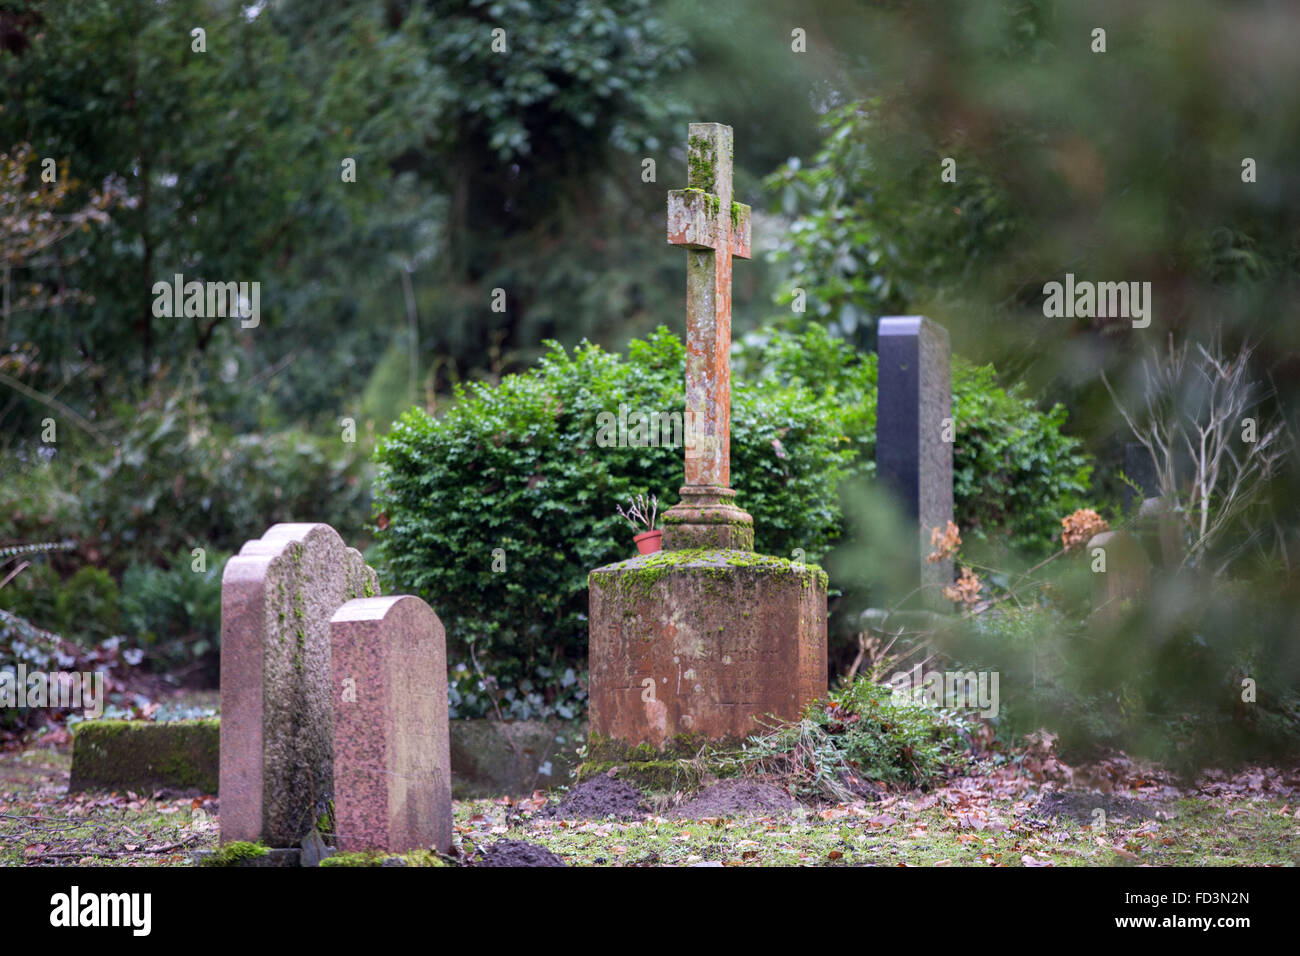 Schwerin, Germany. 27th Jan, 2016. A grave stone in the shape of a cross is seen at the old cemetery in Schwerin, Germany, 27 January 2016. On 28 January 2016 the Parliament of Mecklenburg-Vorpommern is advising the new funeral laws for the northeastern German state. The controversial reform proposals from the Left party for a new burial laws that will see the abolition of the cemetery contraints to allow urn burials in the garden. Photo: Jens Buettner/ZB/dpa/Alamy Live News Stock Photo